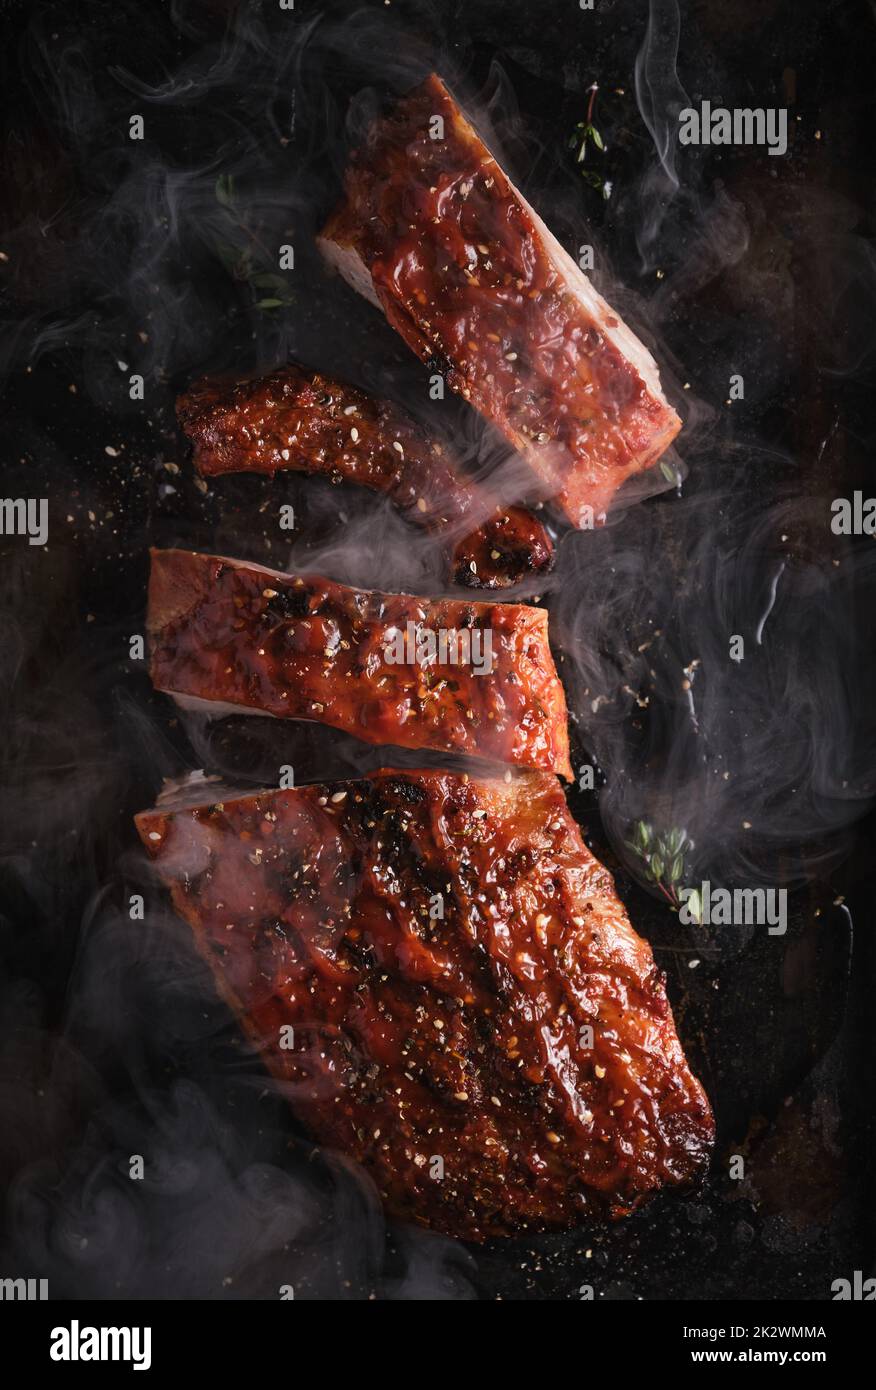 Delicious barbecued ribs seasoned with a spicy basting sauce and served on iron pan. Stock Photo